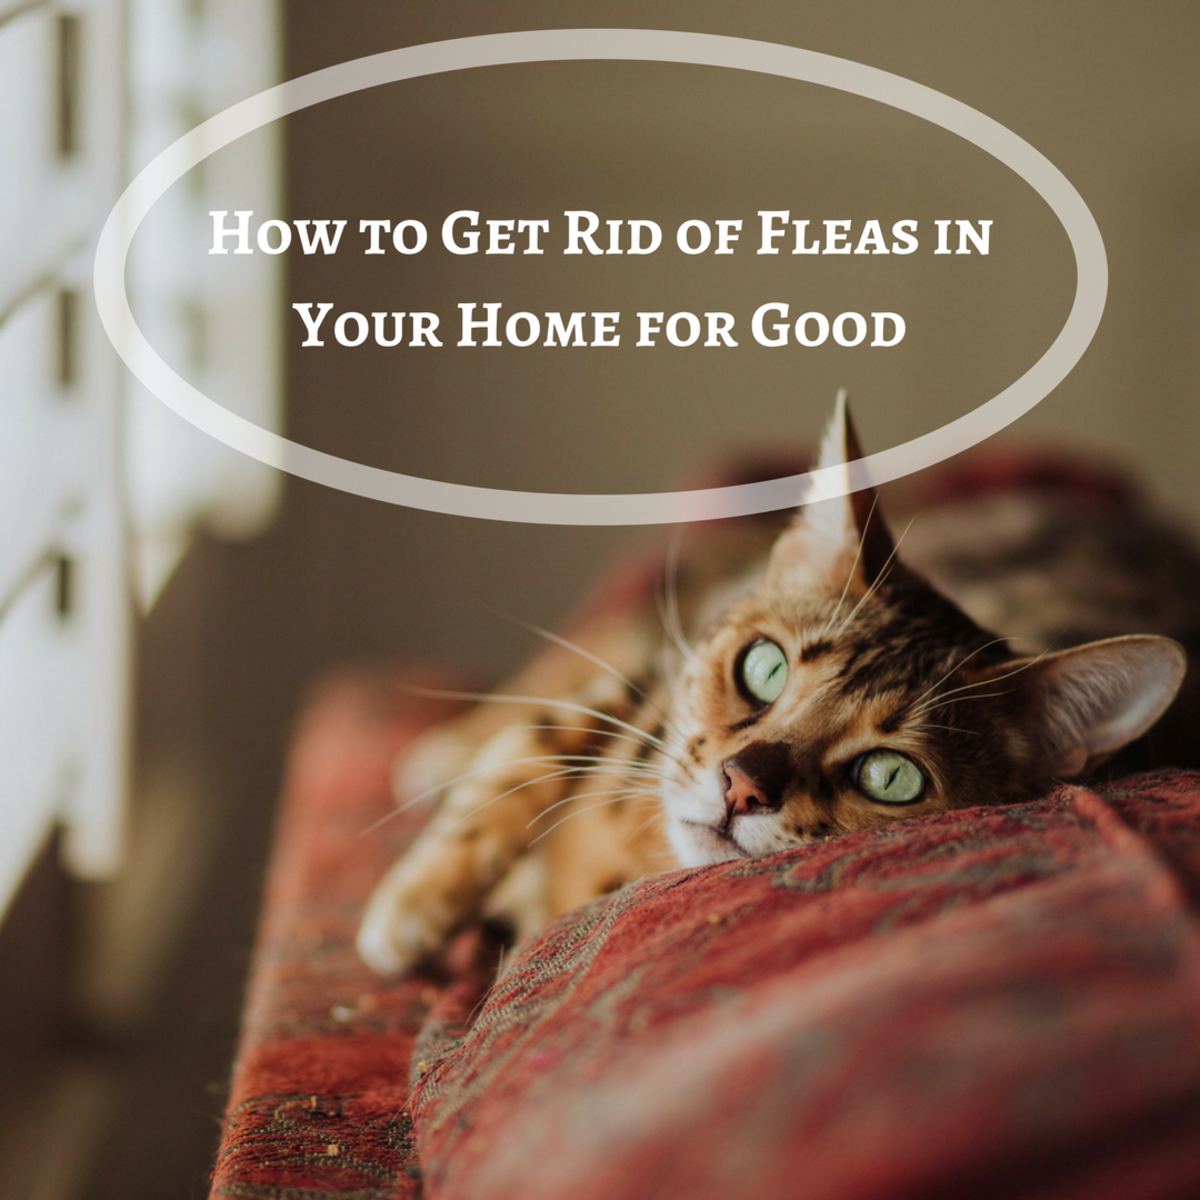 Don't waste your money on useless flea products.